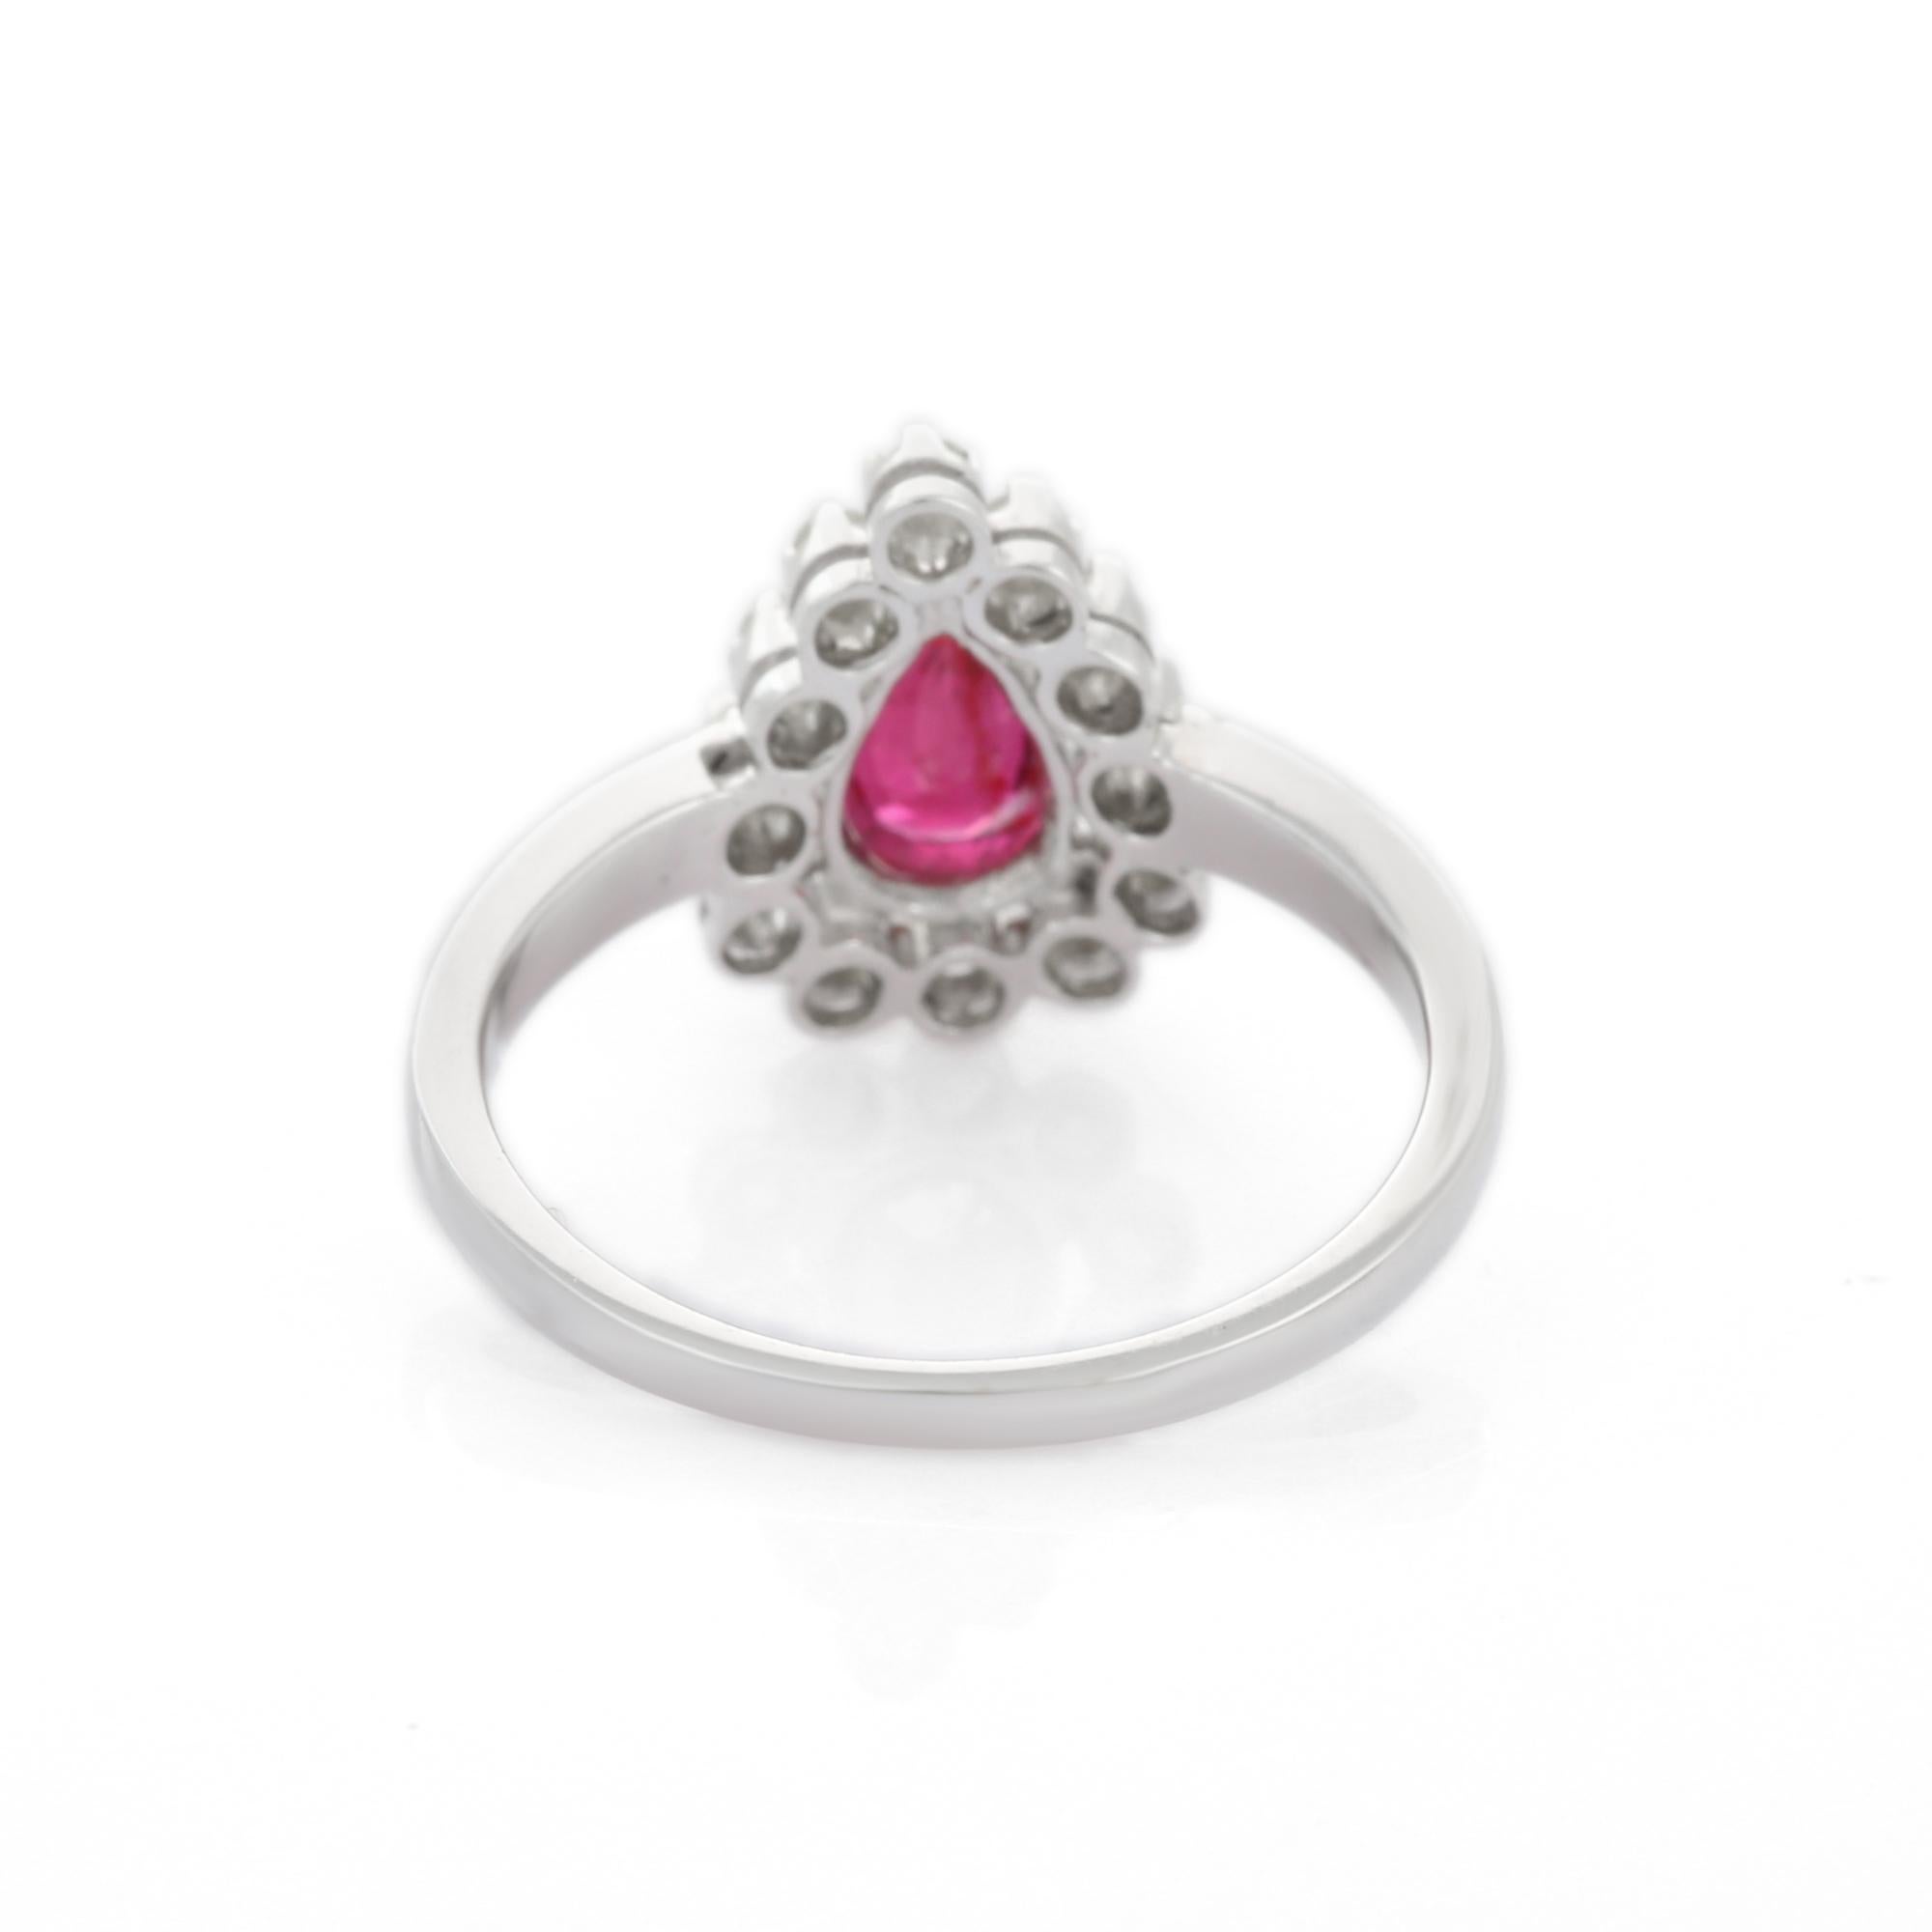 For Sale:  Pear Cut Ruby Diamond Engagement Ring in 14K White Gold  5